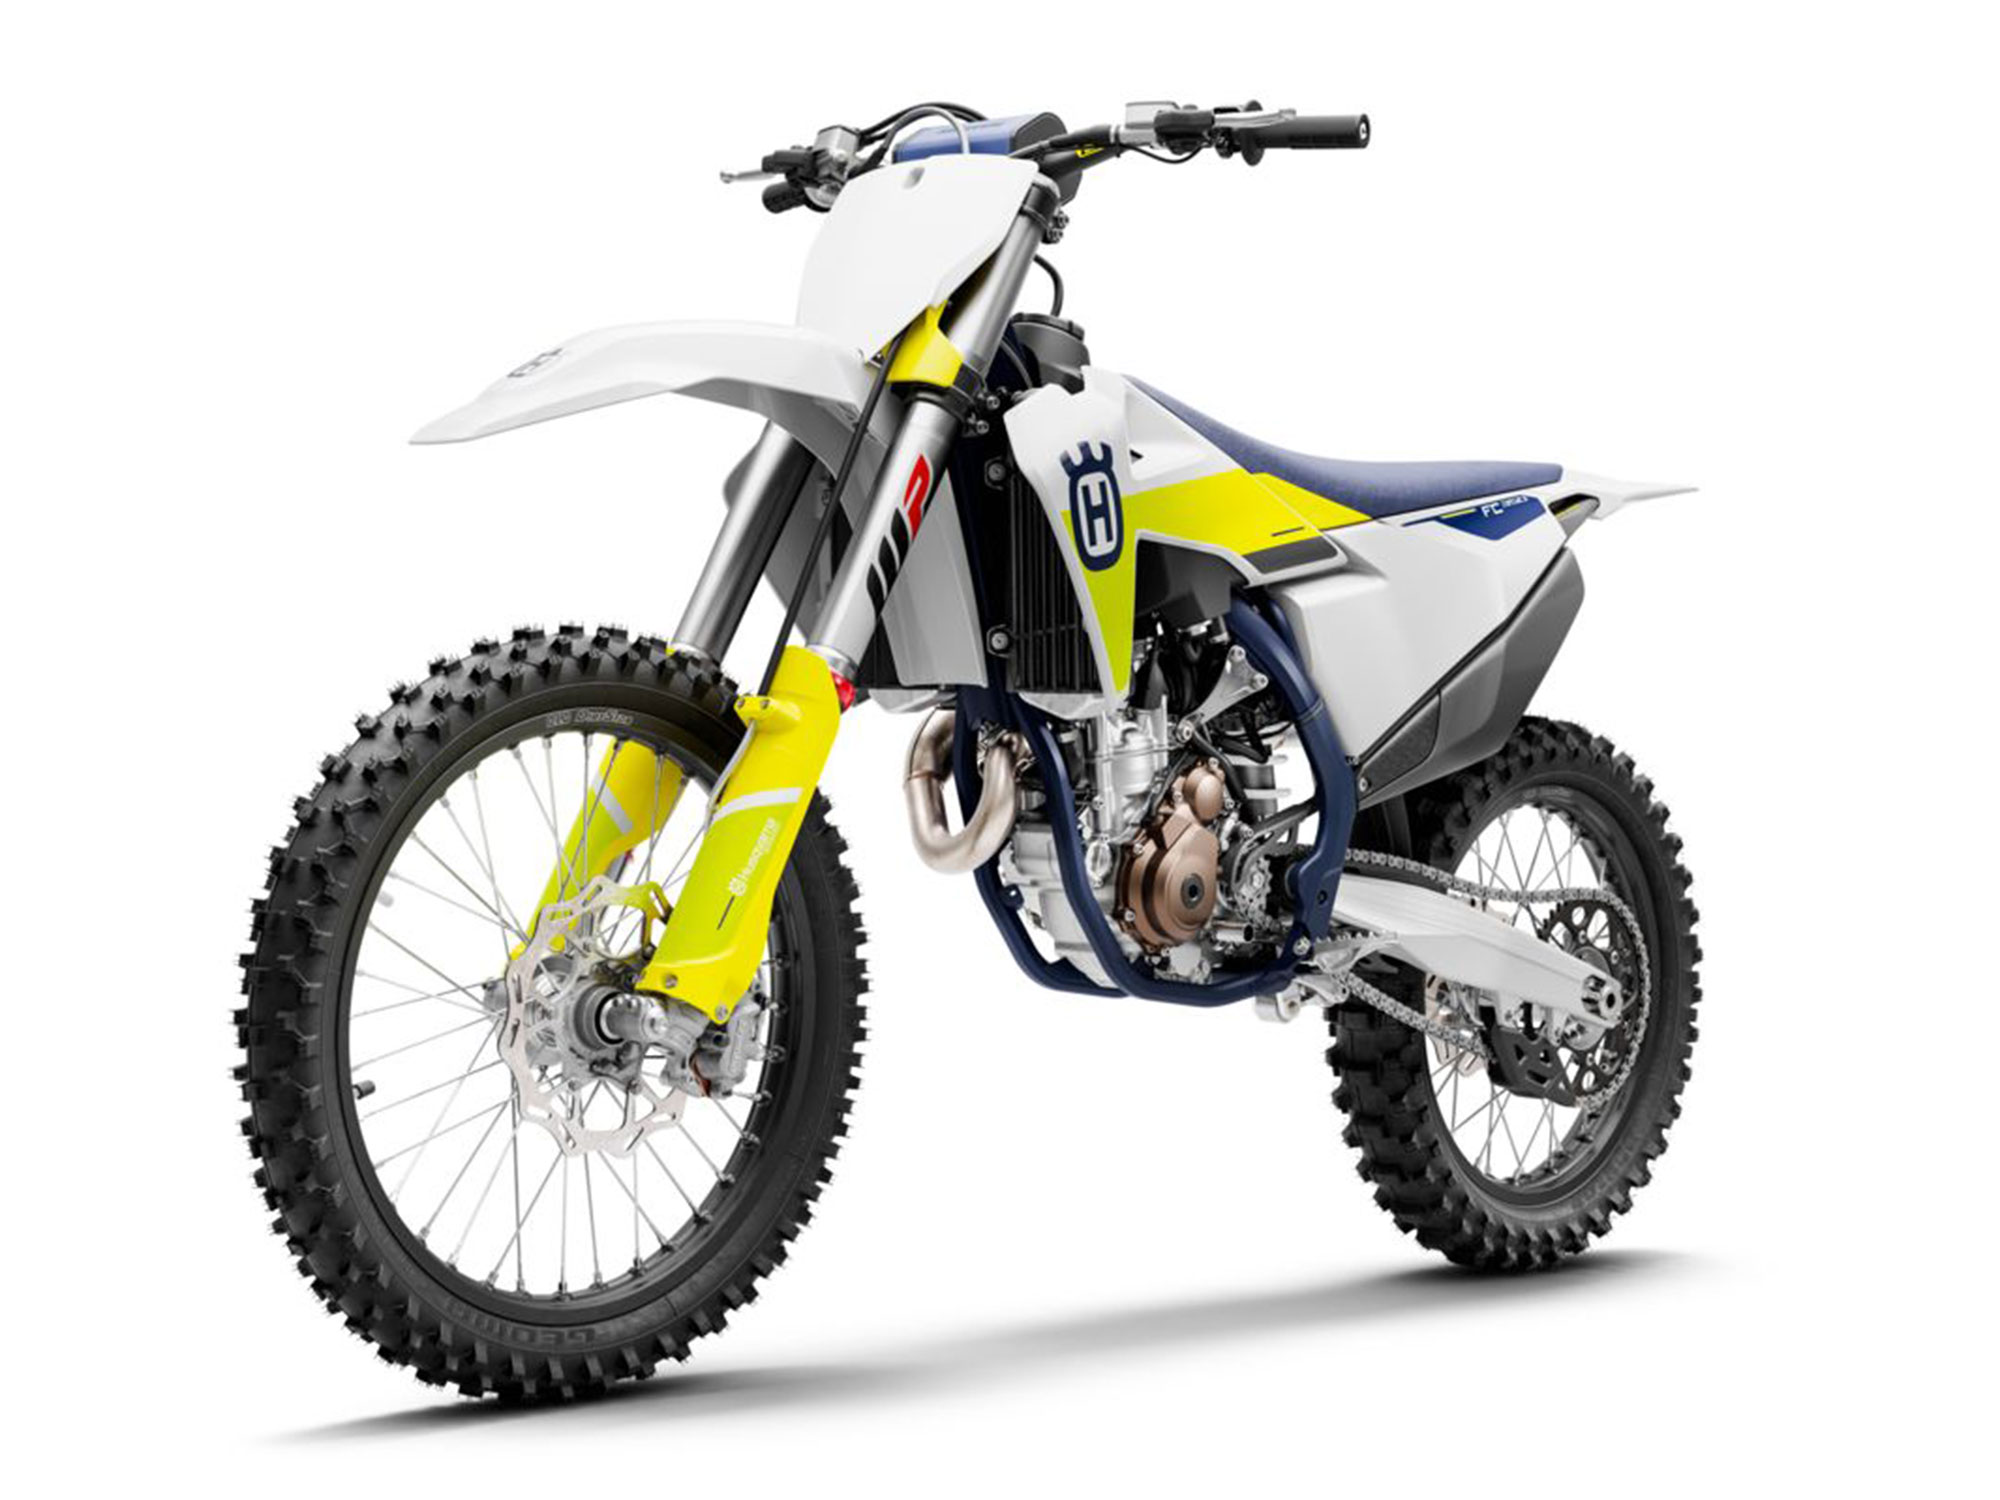 Gestionar Intenso violento 2021 Husqvarna FC 350 Buyer's Guide: Specs, Photos, Price | Cycle World